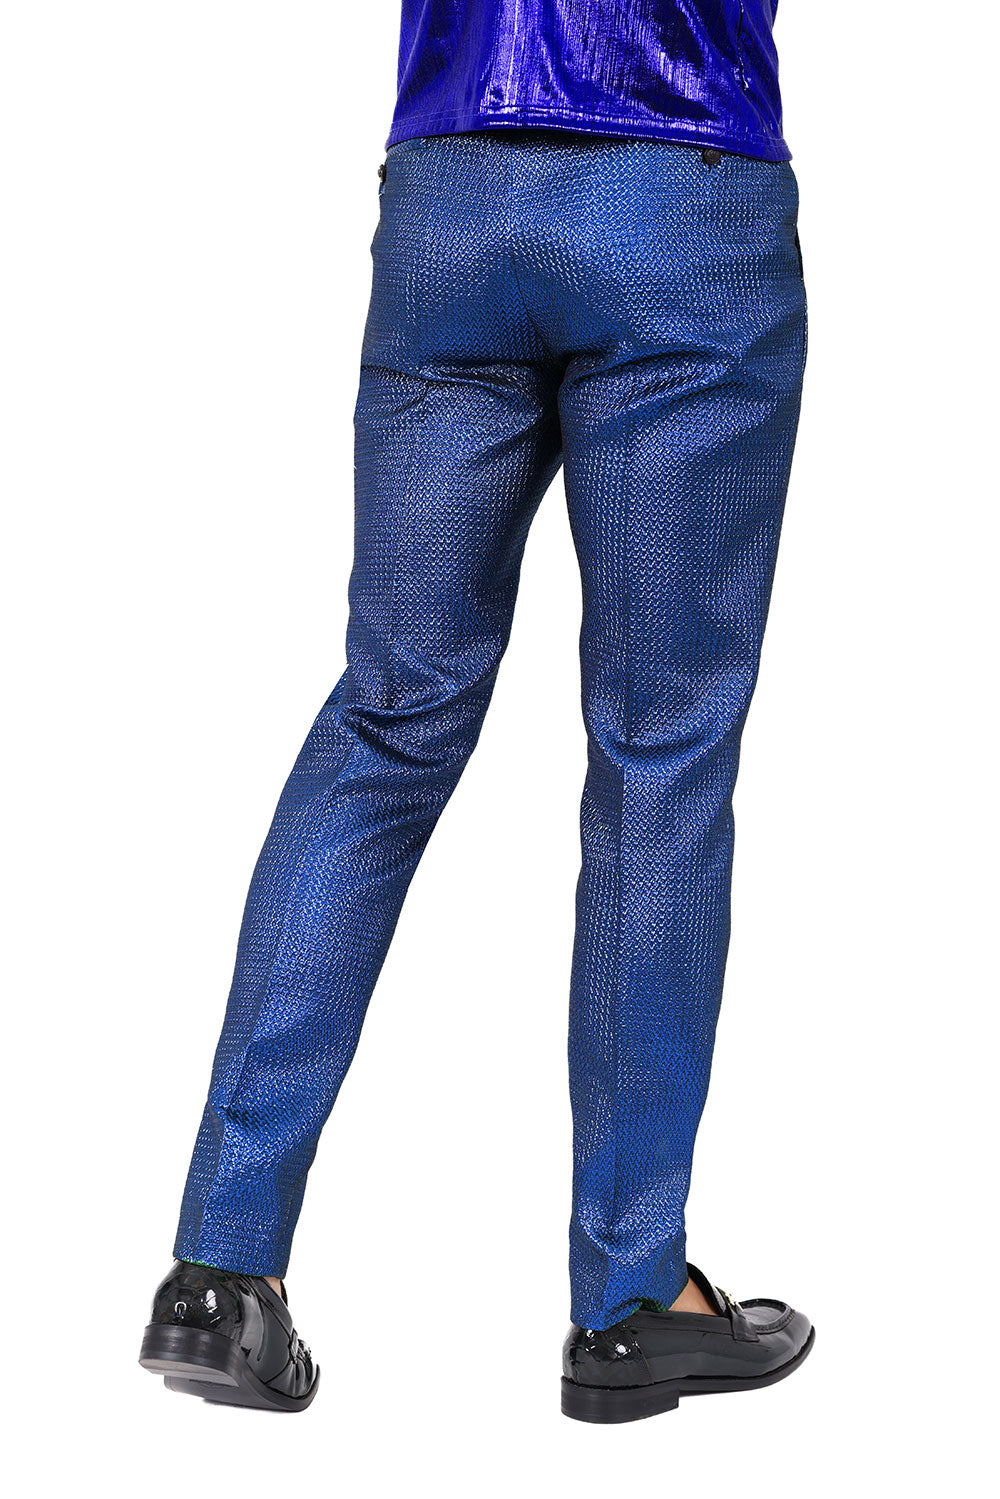 Barabas Men's Solid Vibrant Color Luxury Chino Pants 2cp3105 Sapphire